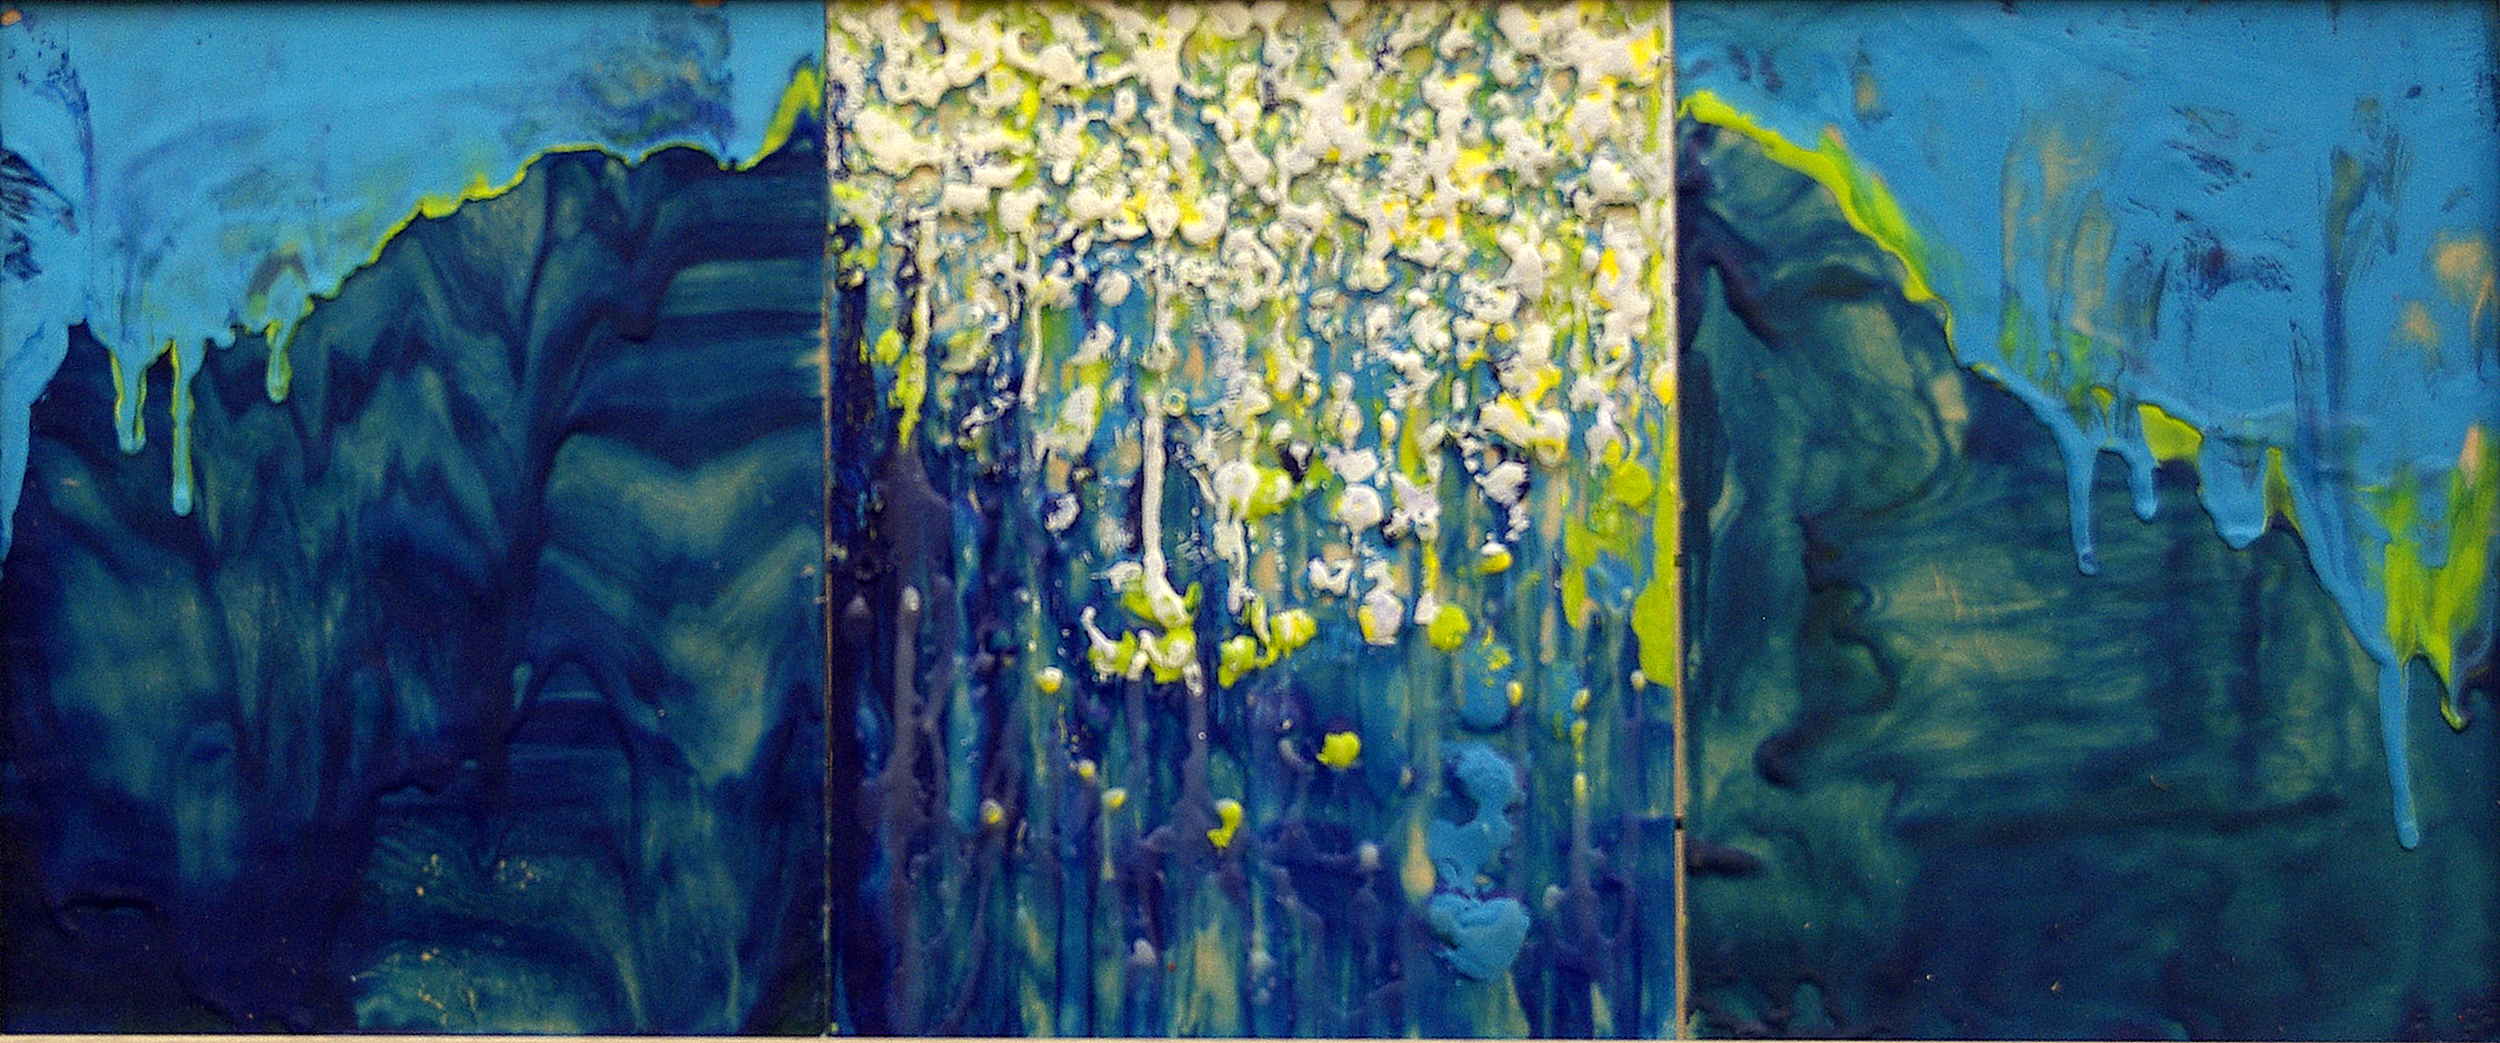 Turquoise and Yellow Rain Triptych